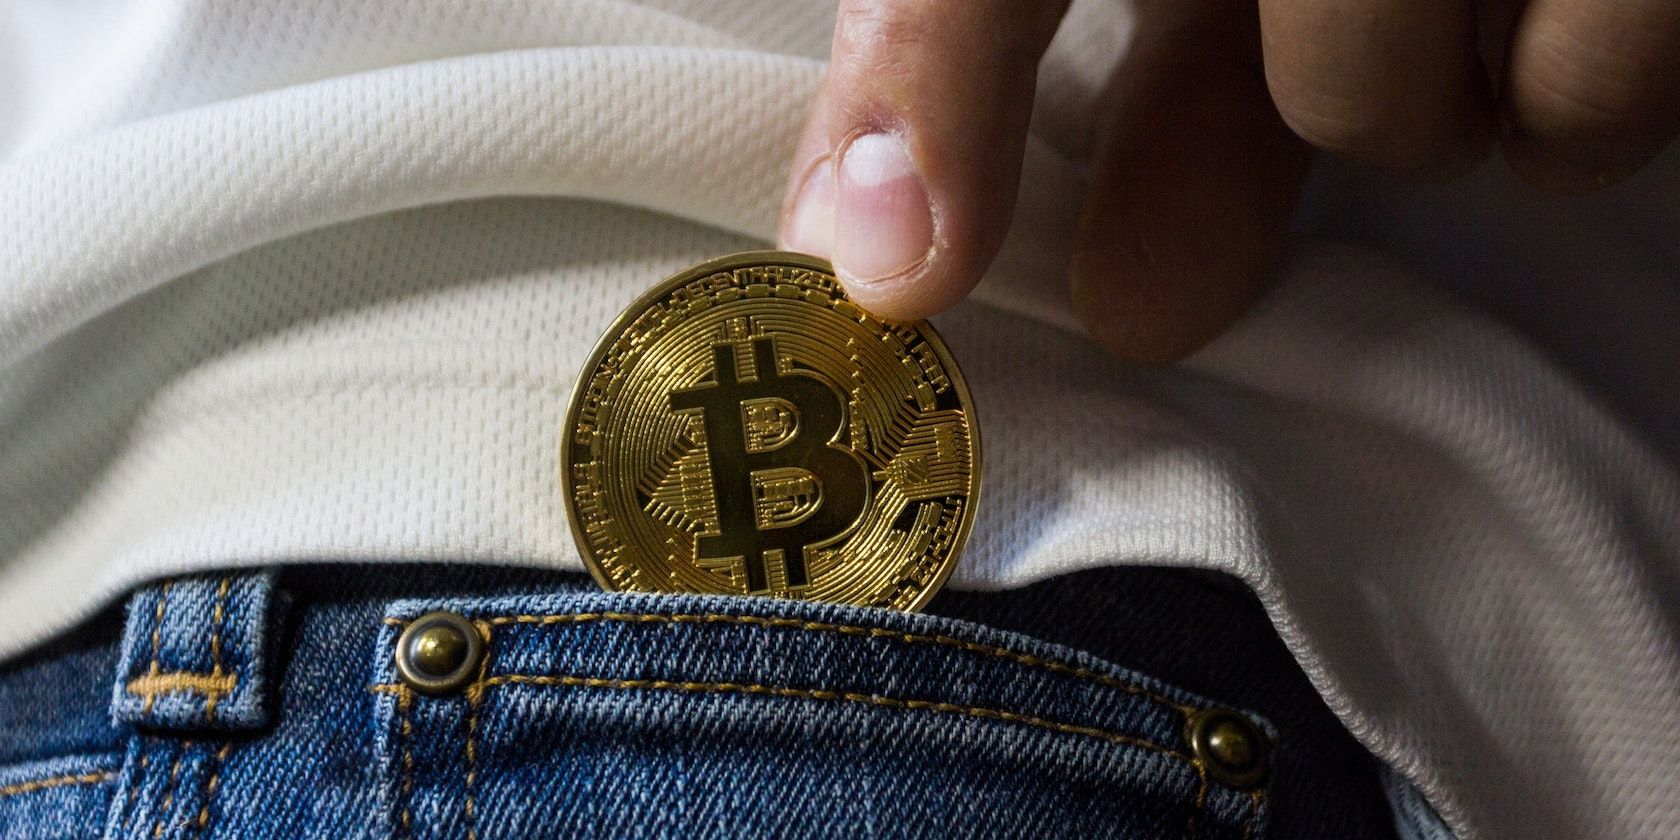 a picture of hand putting bitcoin in pocket